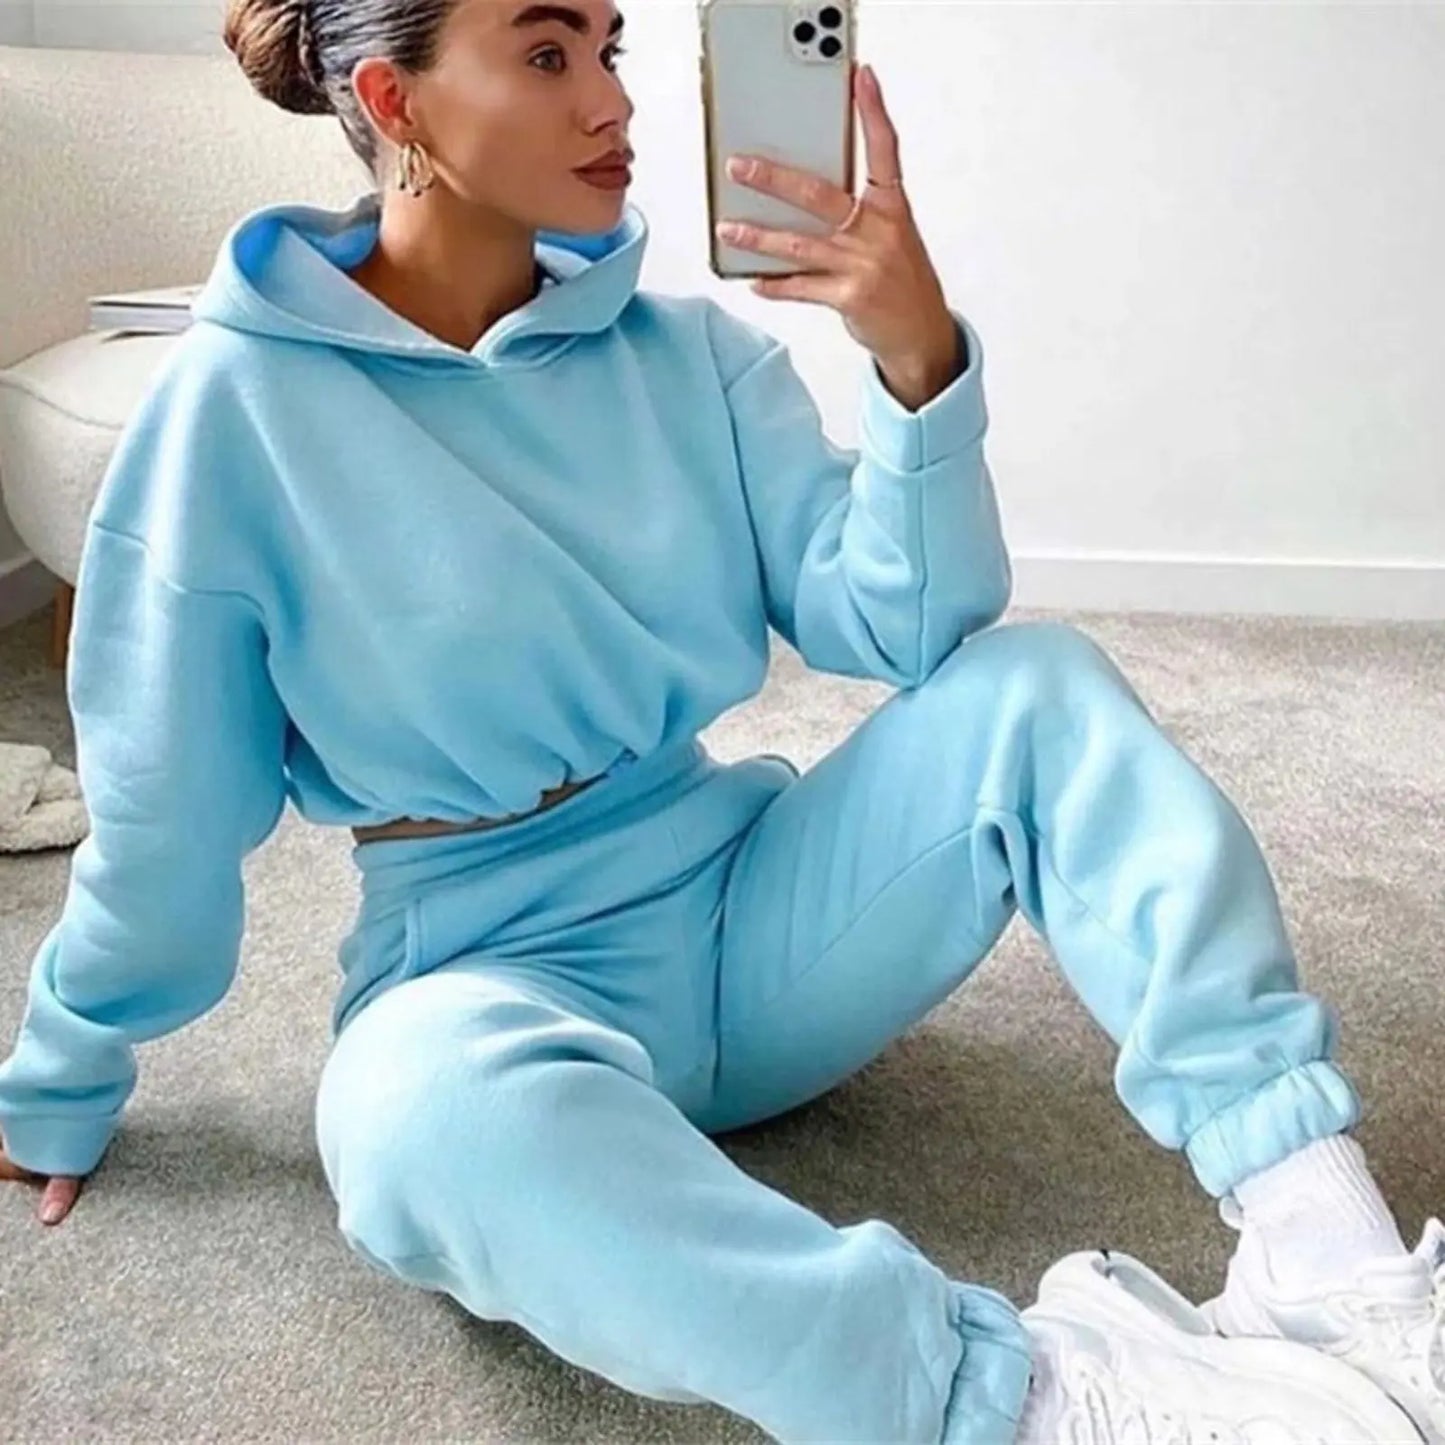 dresses  | Jogging Suits For Women 2 Piece Sweatsuits Tracksuits Sexy Long Sleeve HoodieCasual Fitness Sportswear | Blue |  L| thecurvestory.myshopify.com